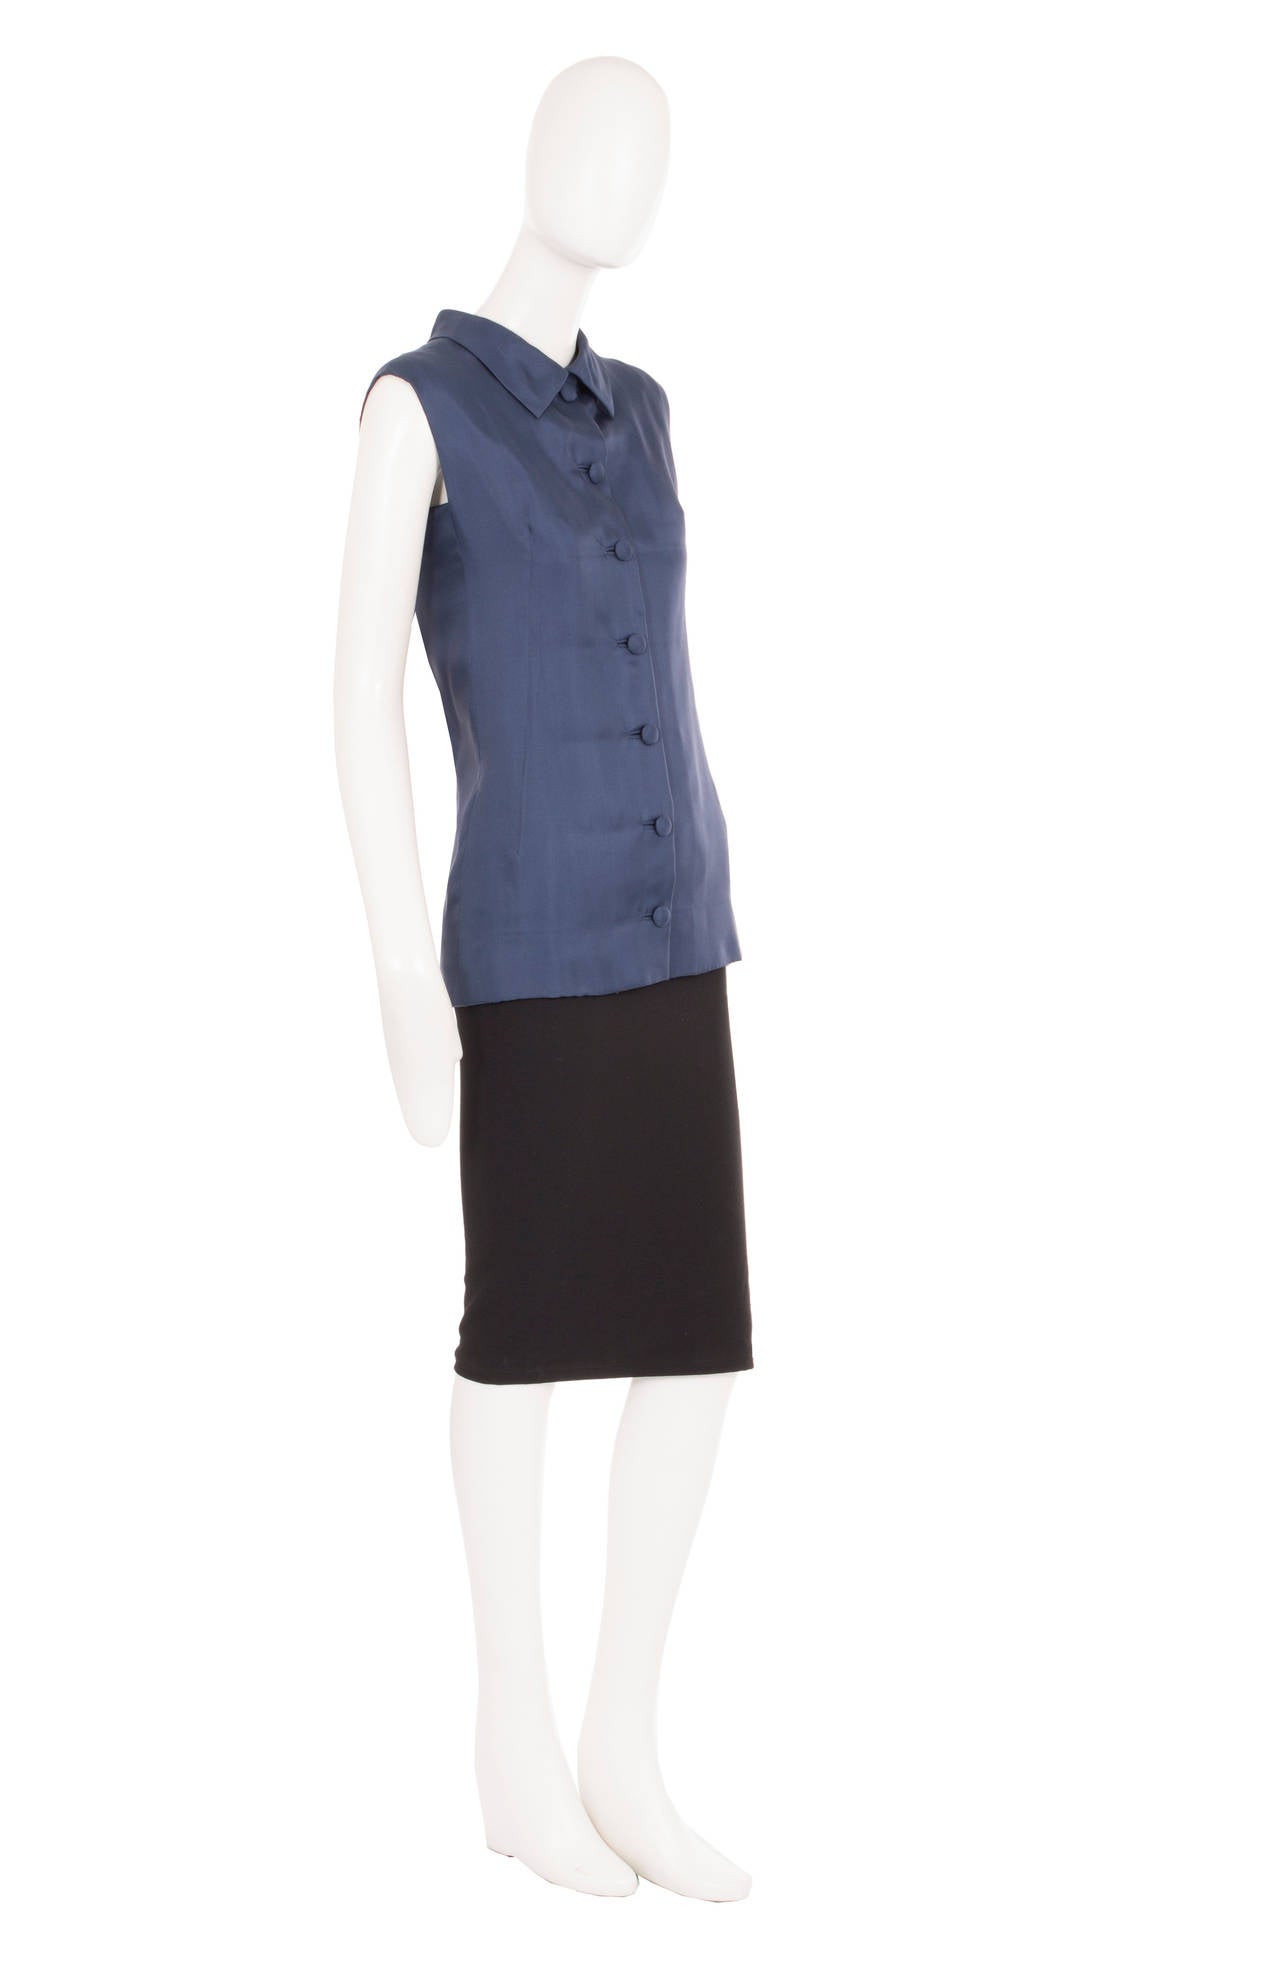 This haute couture sleeveless shirt by Balenciaga for his Eisa label is a fantastic wardrobe staple, whether paired with a pencil skirt to the office or tailored trousers for everyday. Constructed in deep navy silk the shirt features a double lapel